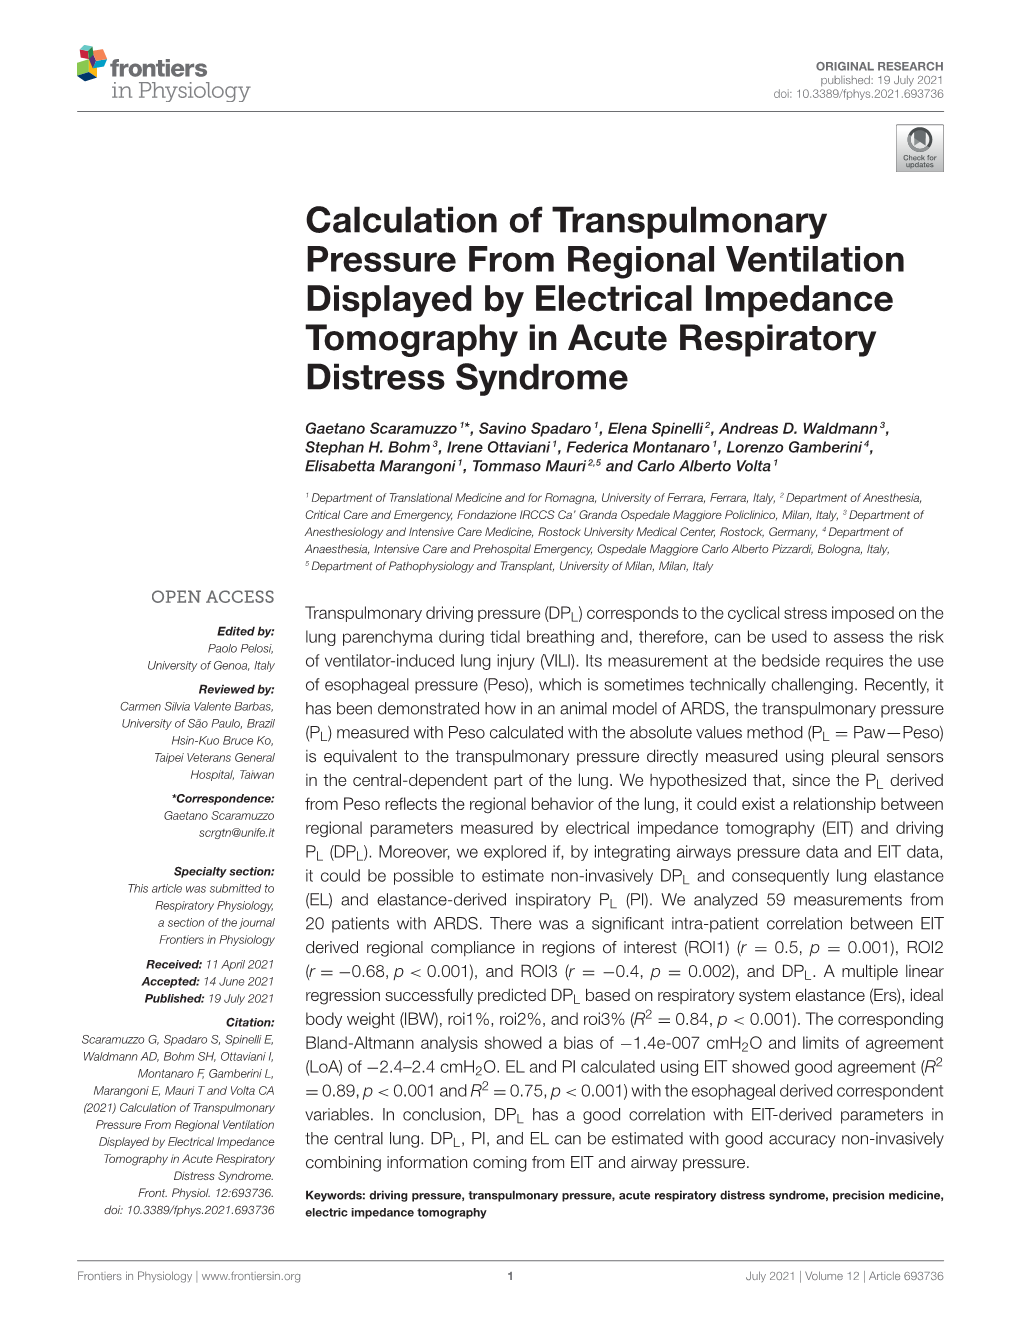 Calculation of Transpulmonary Pressure from Regional Ventilation Displayed by Electrical Impedance Tomography in Acute Respiratory Distress Syndrome